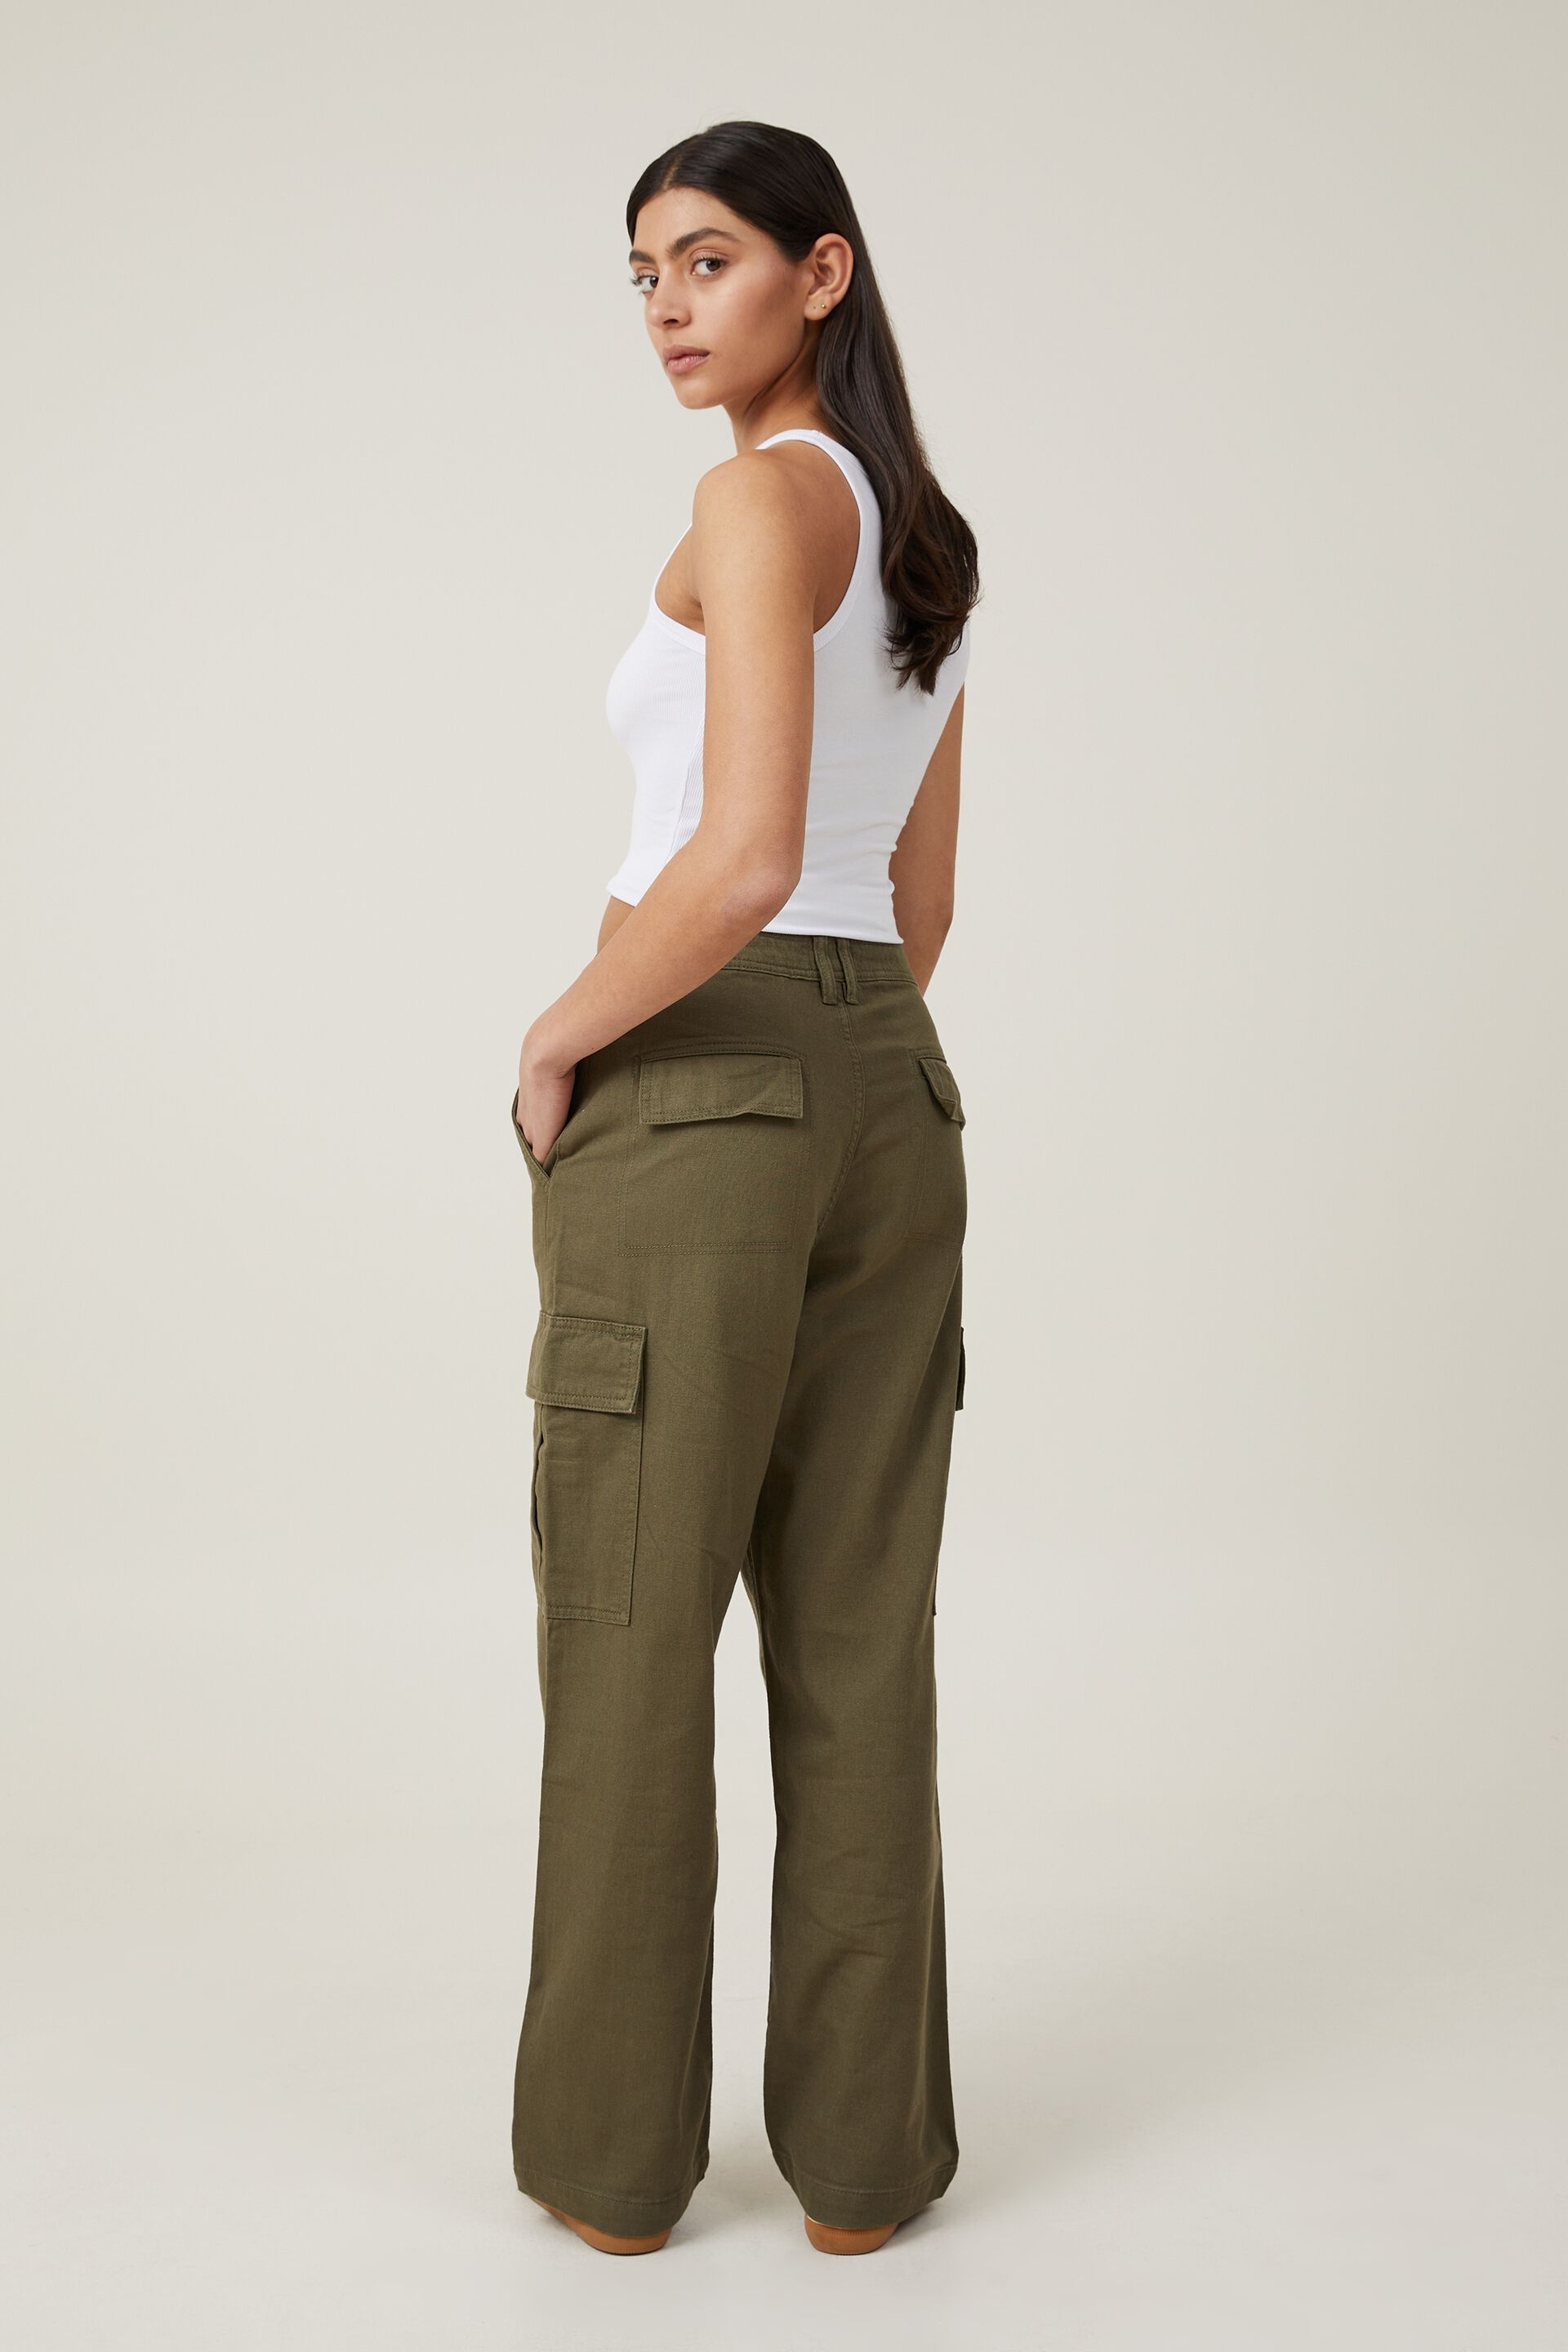 Cotton On Women's Bobbie Cargo Pants In Soft Olive | ModeSens